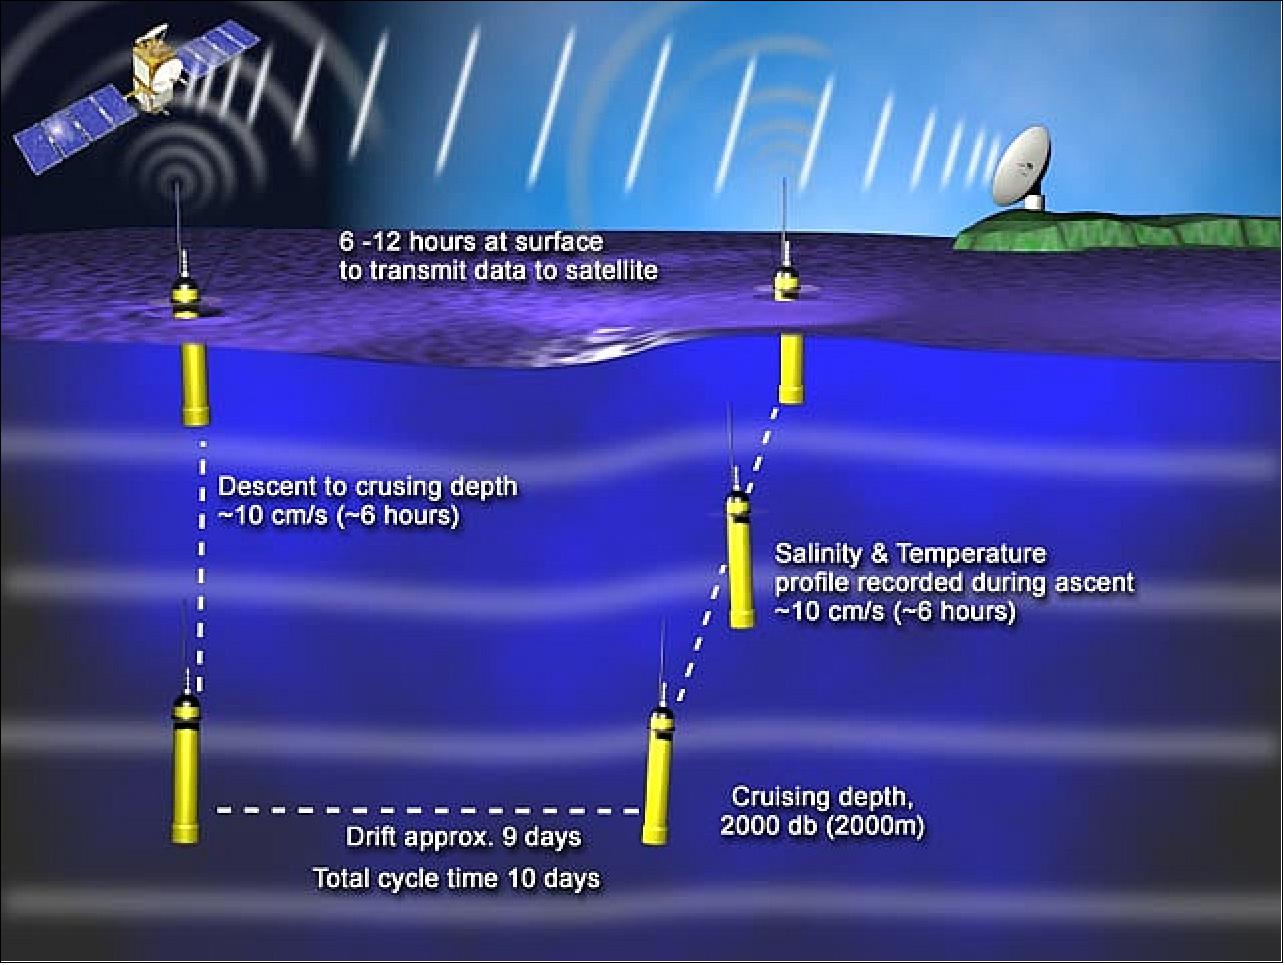 Figure 6: Schematic operating sequence of an Argo float (image credit: Southampton Oceanography Centre, UK)